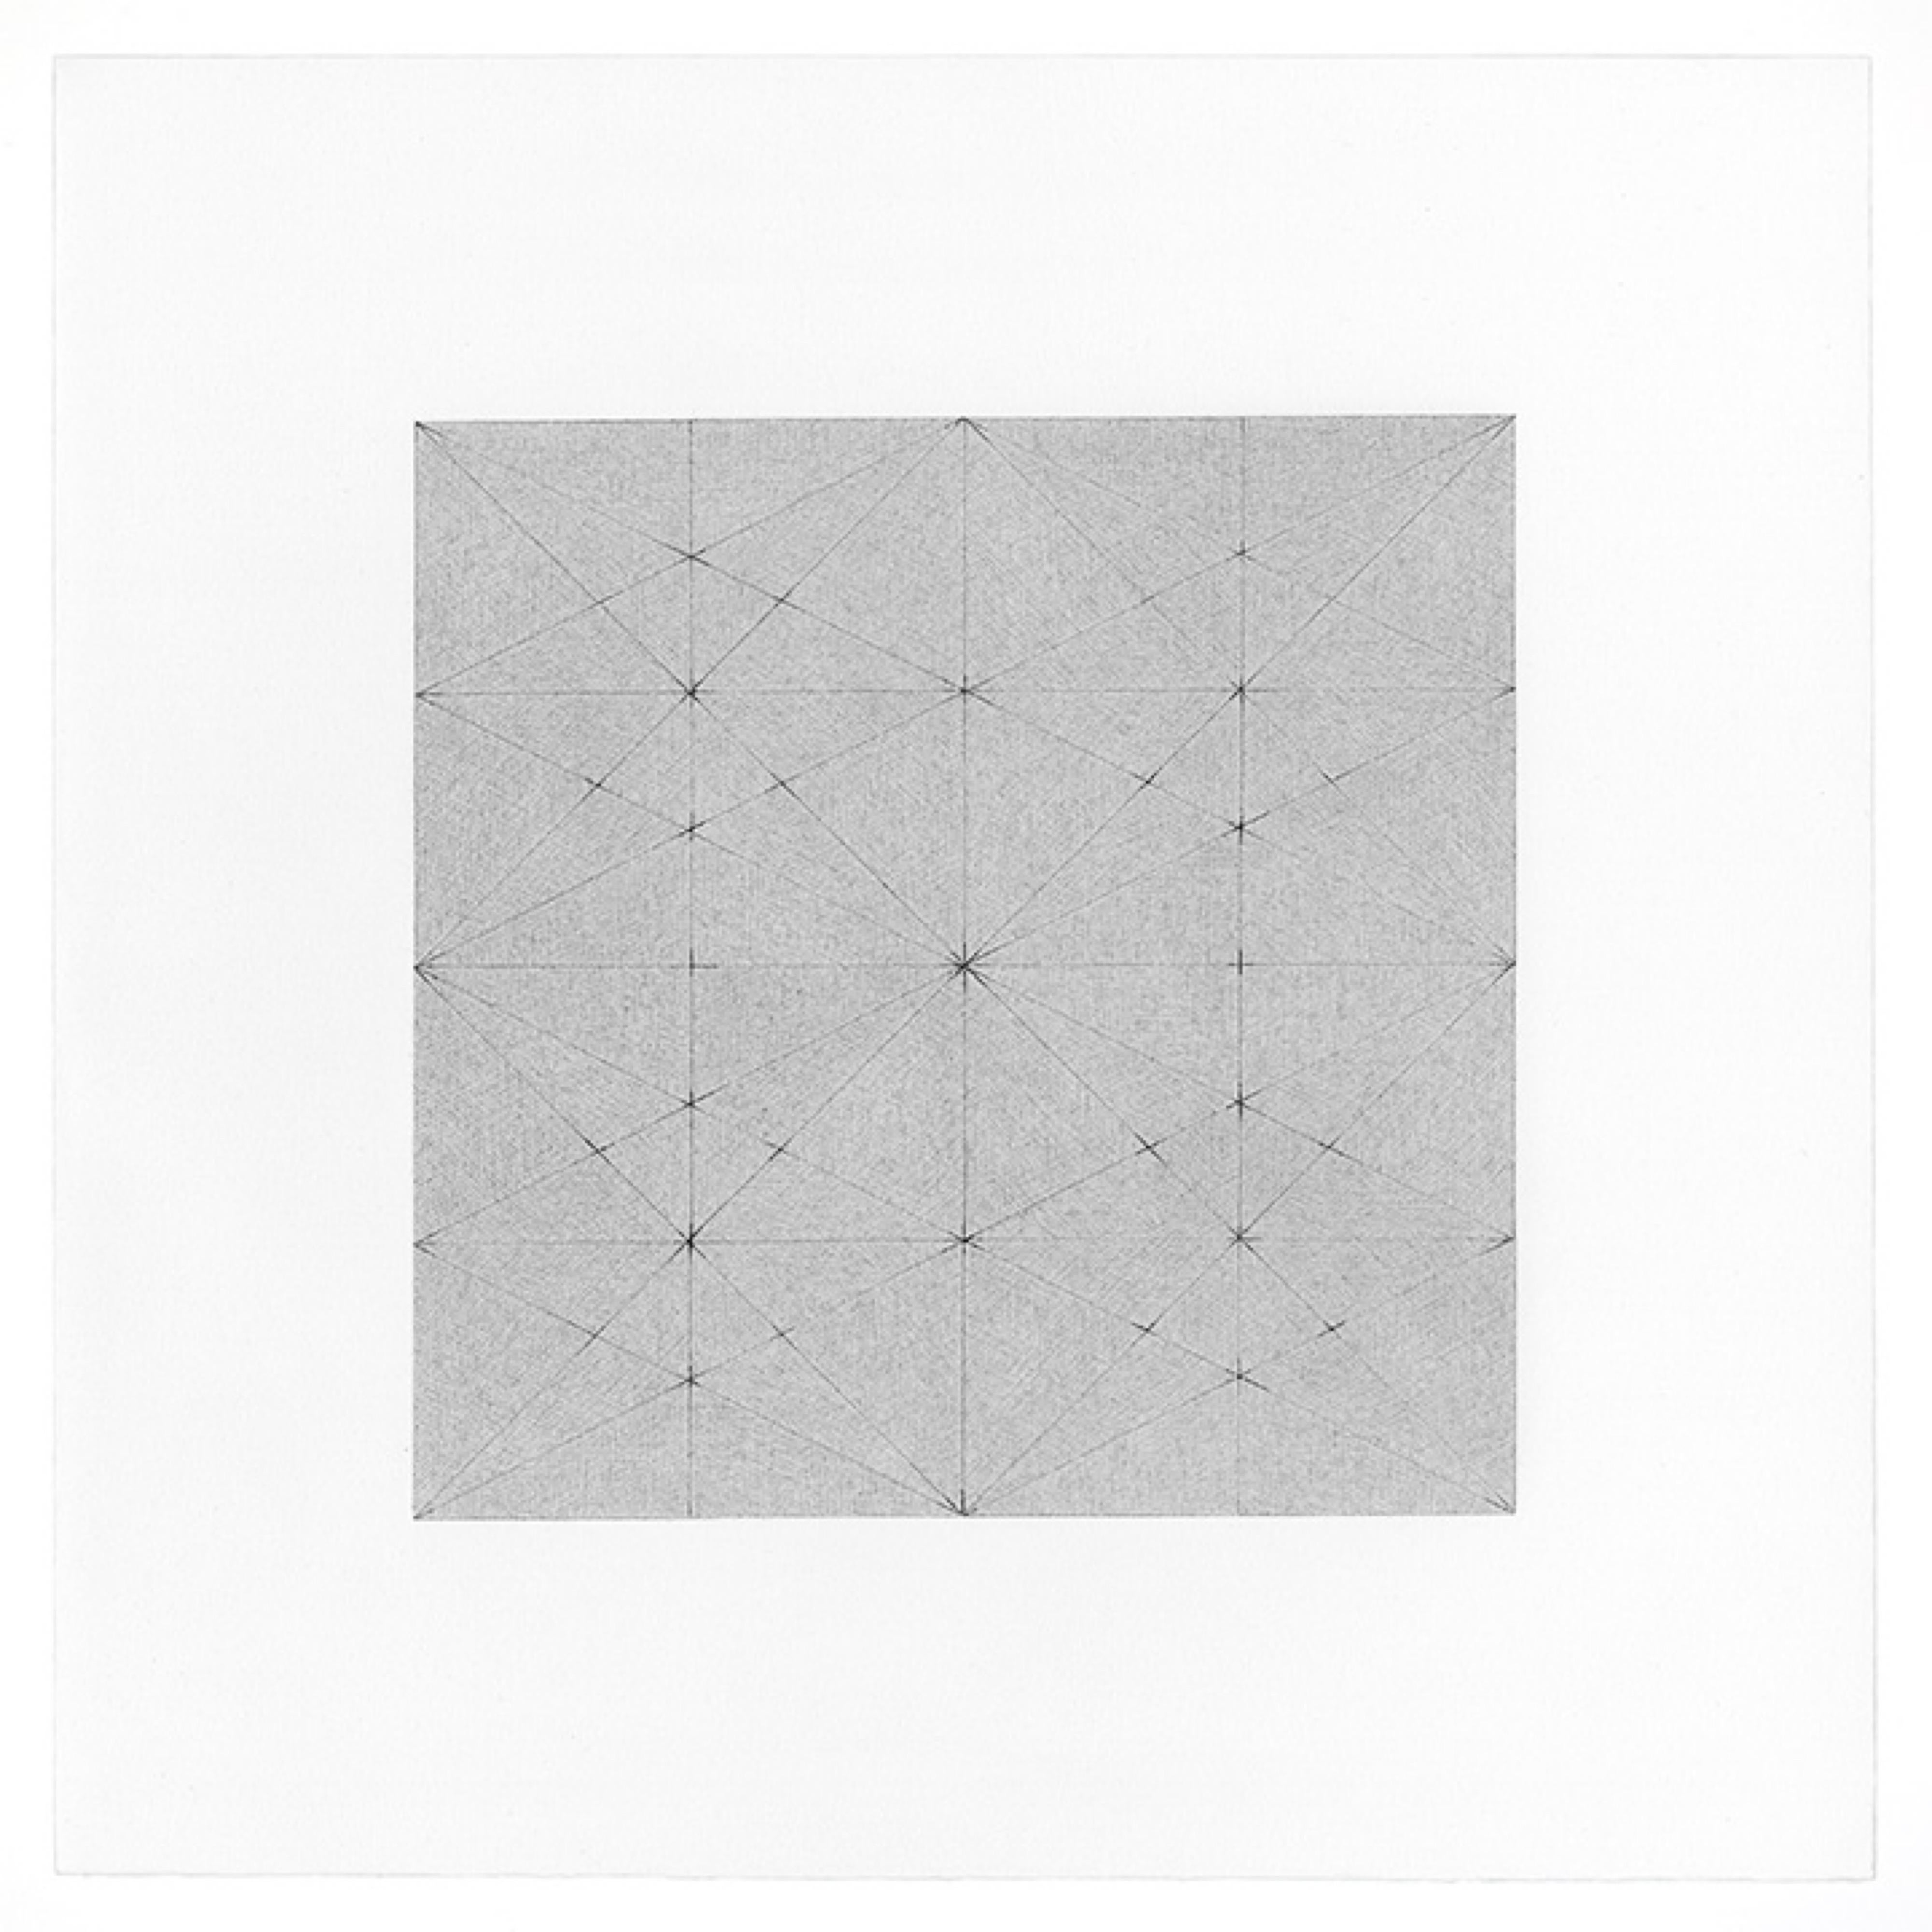 American Patrick Carrara Graphite on Magni Drawings, Garden of Silence Series, 2009 For Sale